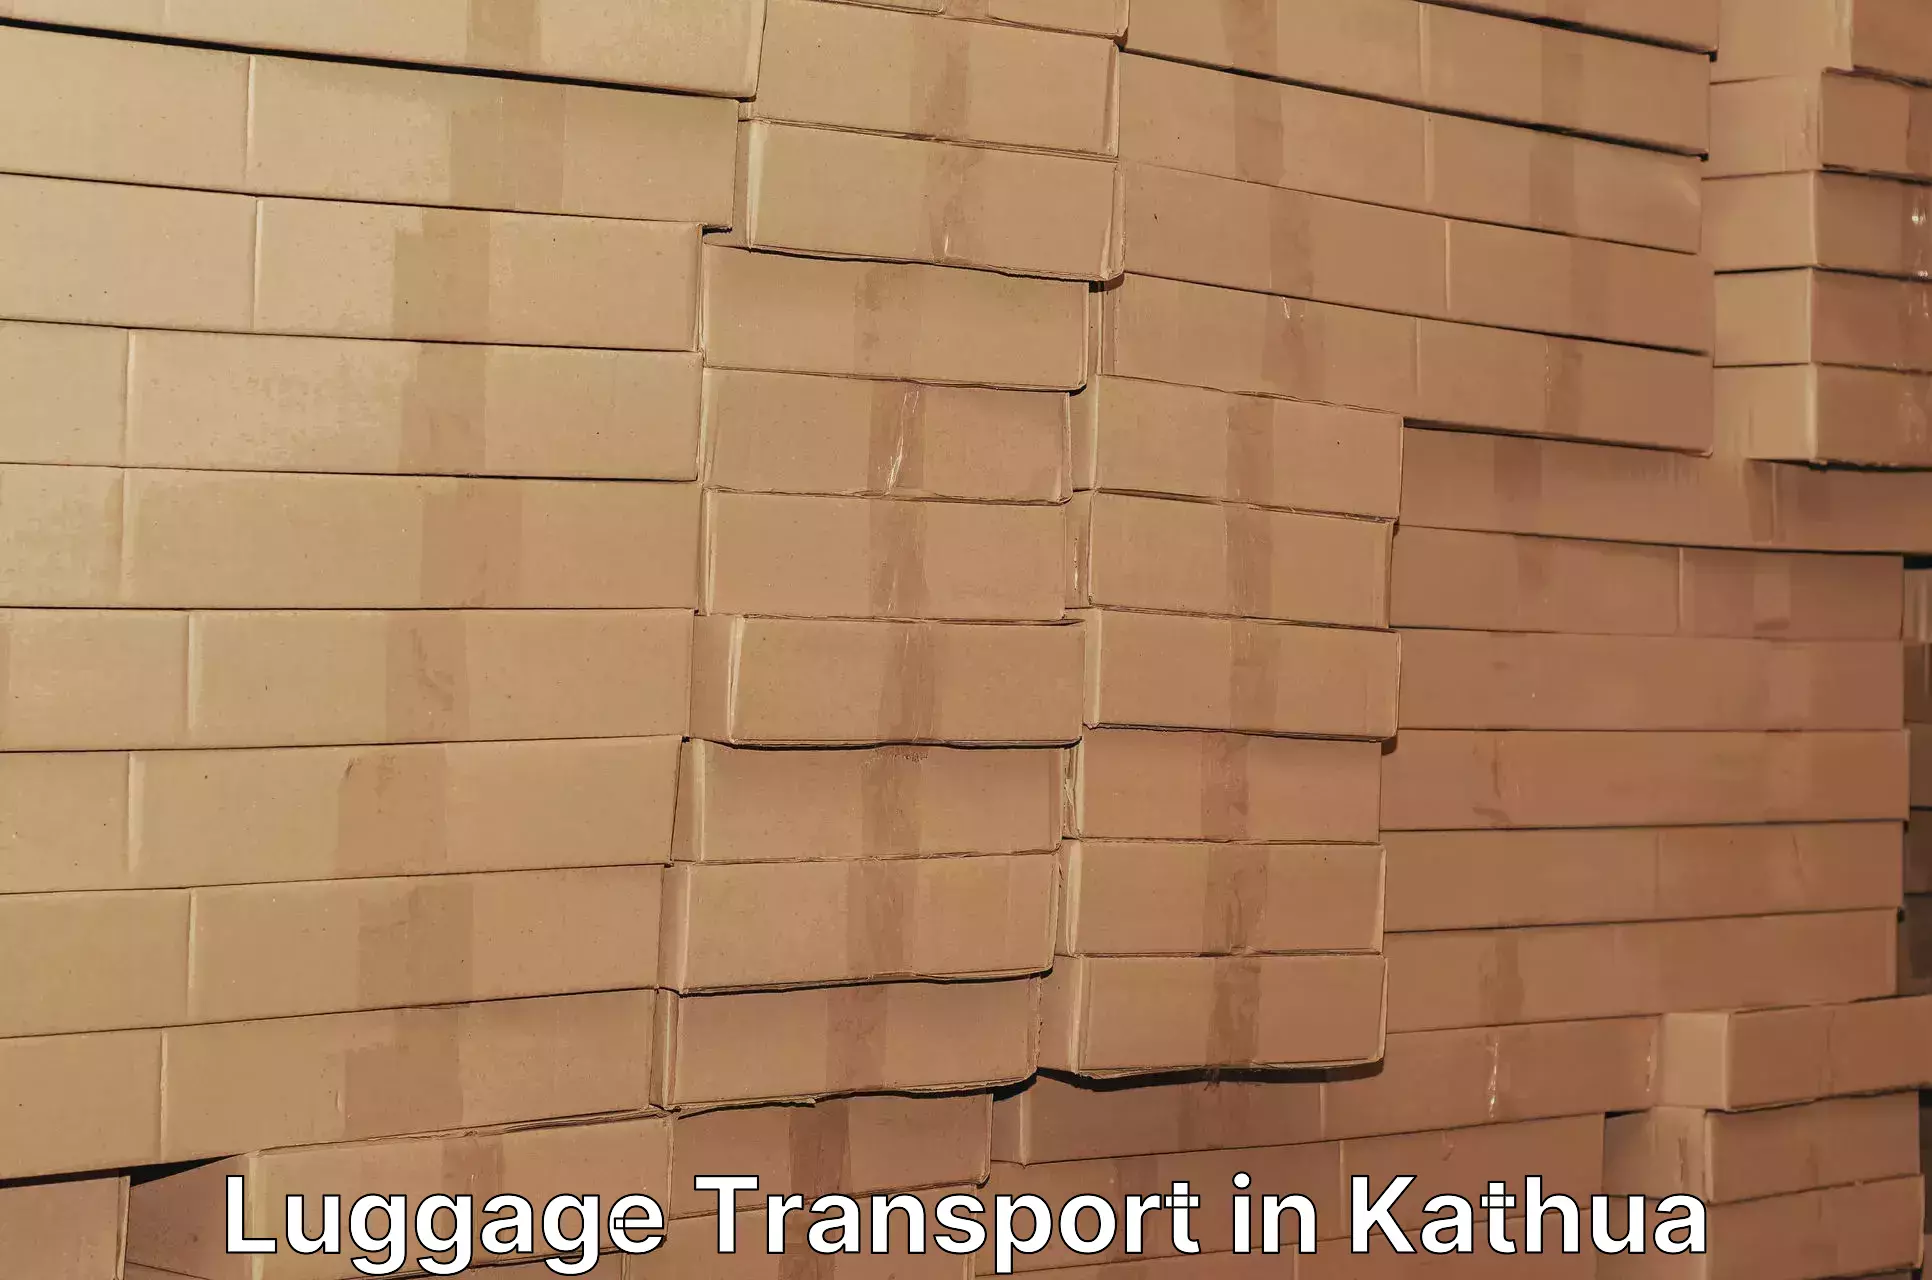 Luggage transport deals in Kathua